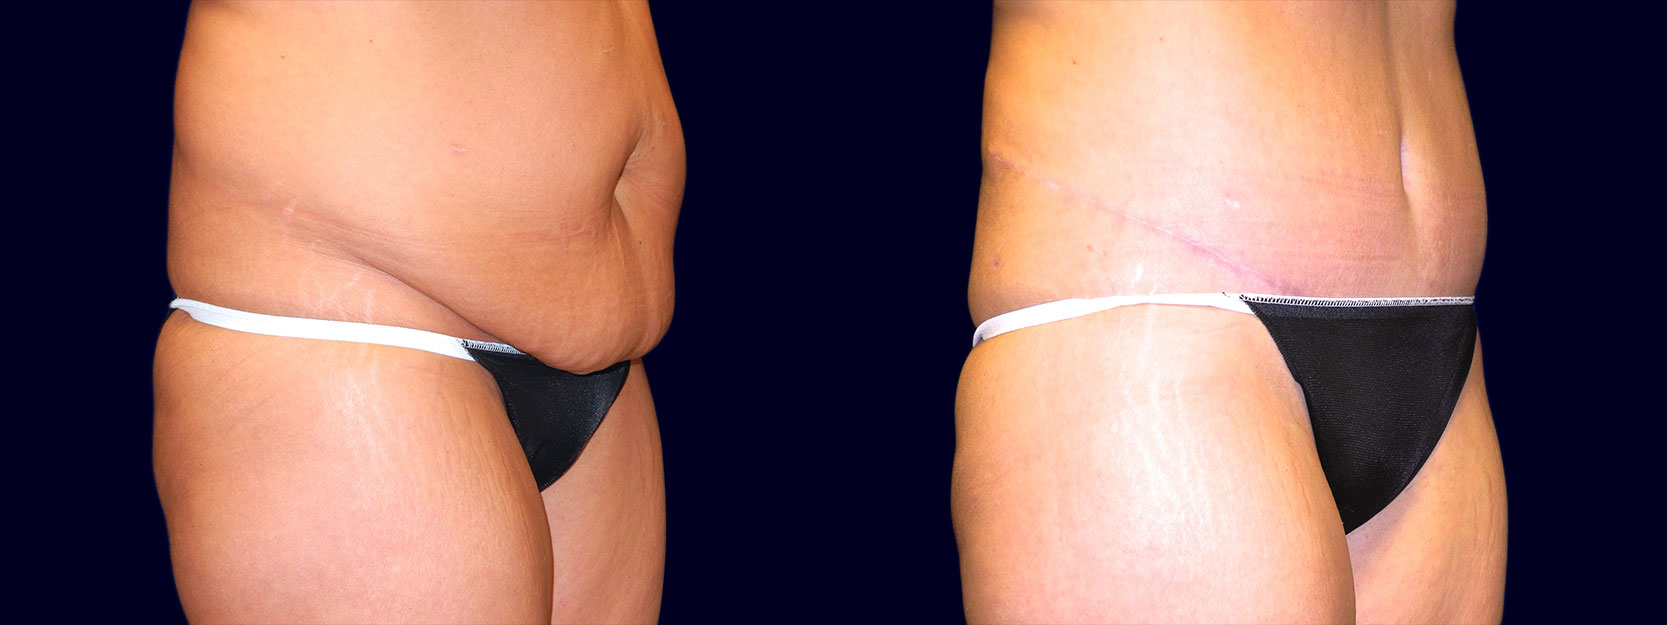 Right 3/4 View - Tummy Tuck After Weight Loss